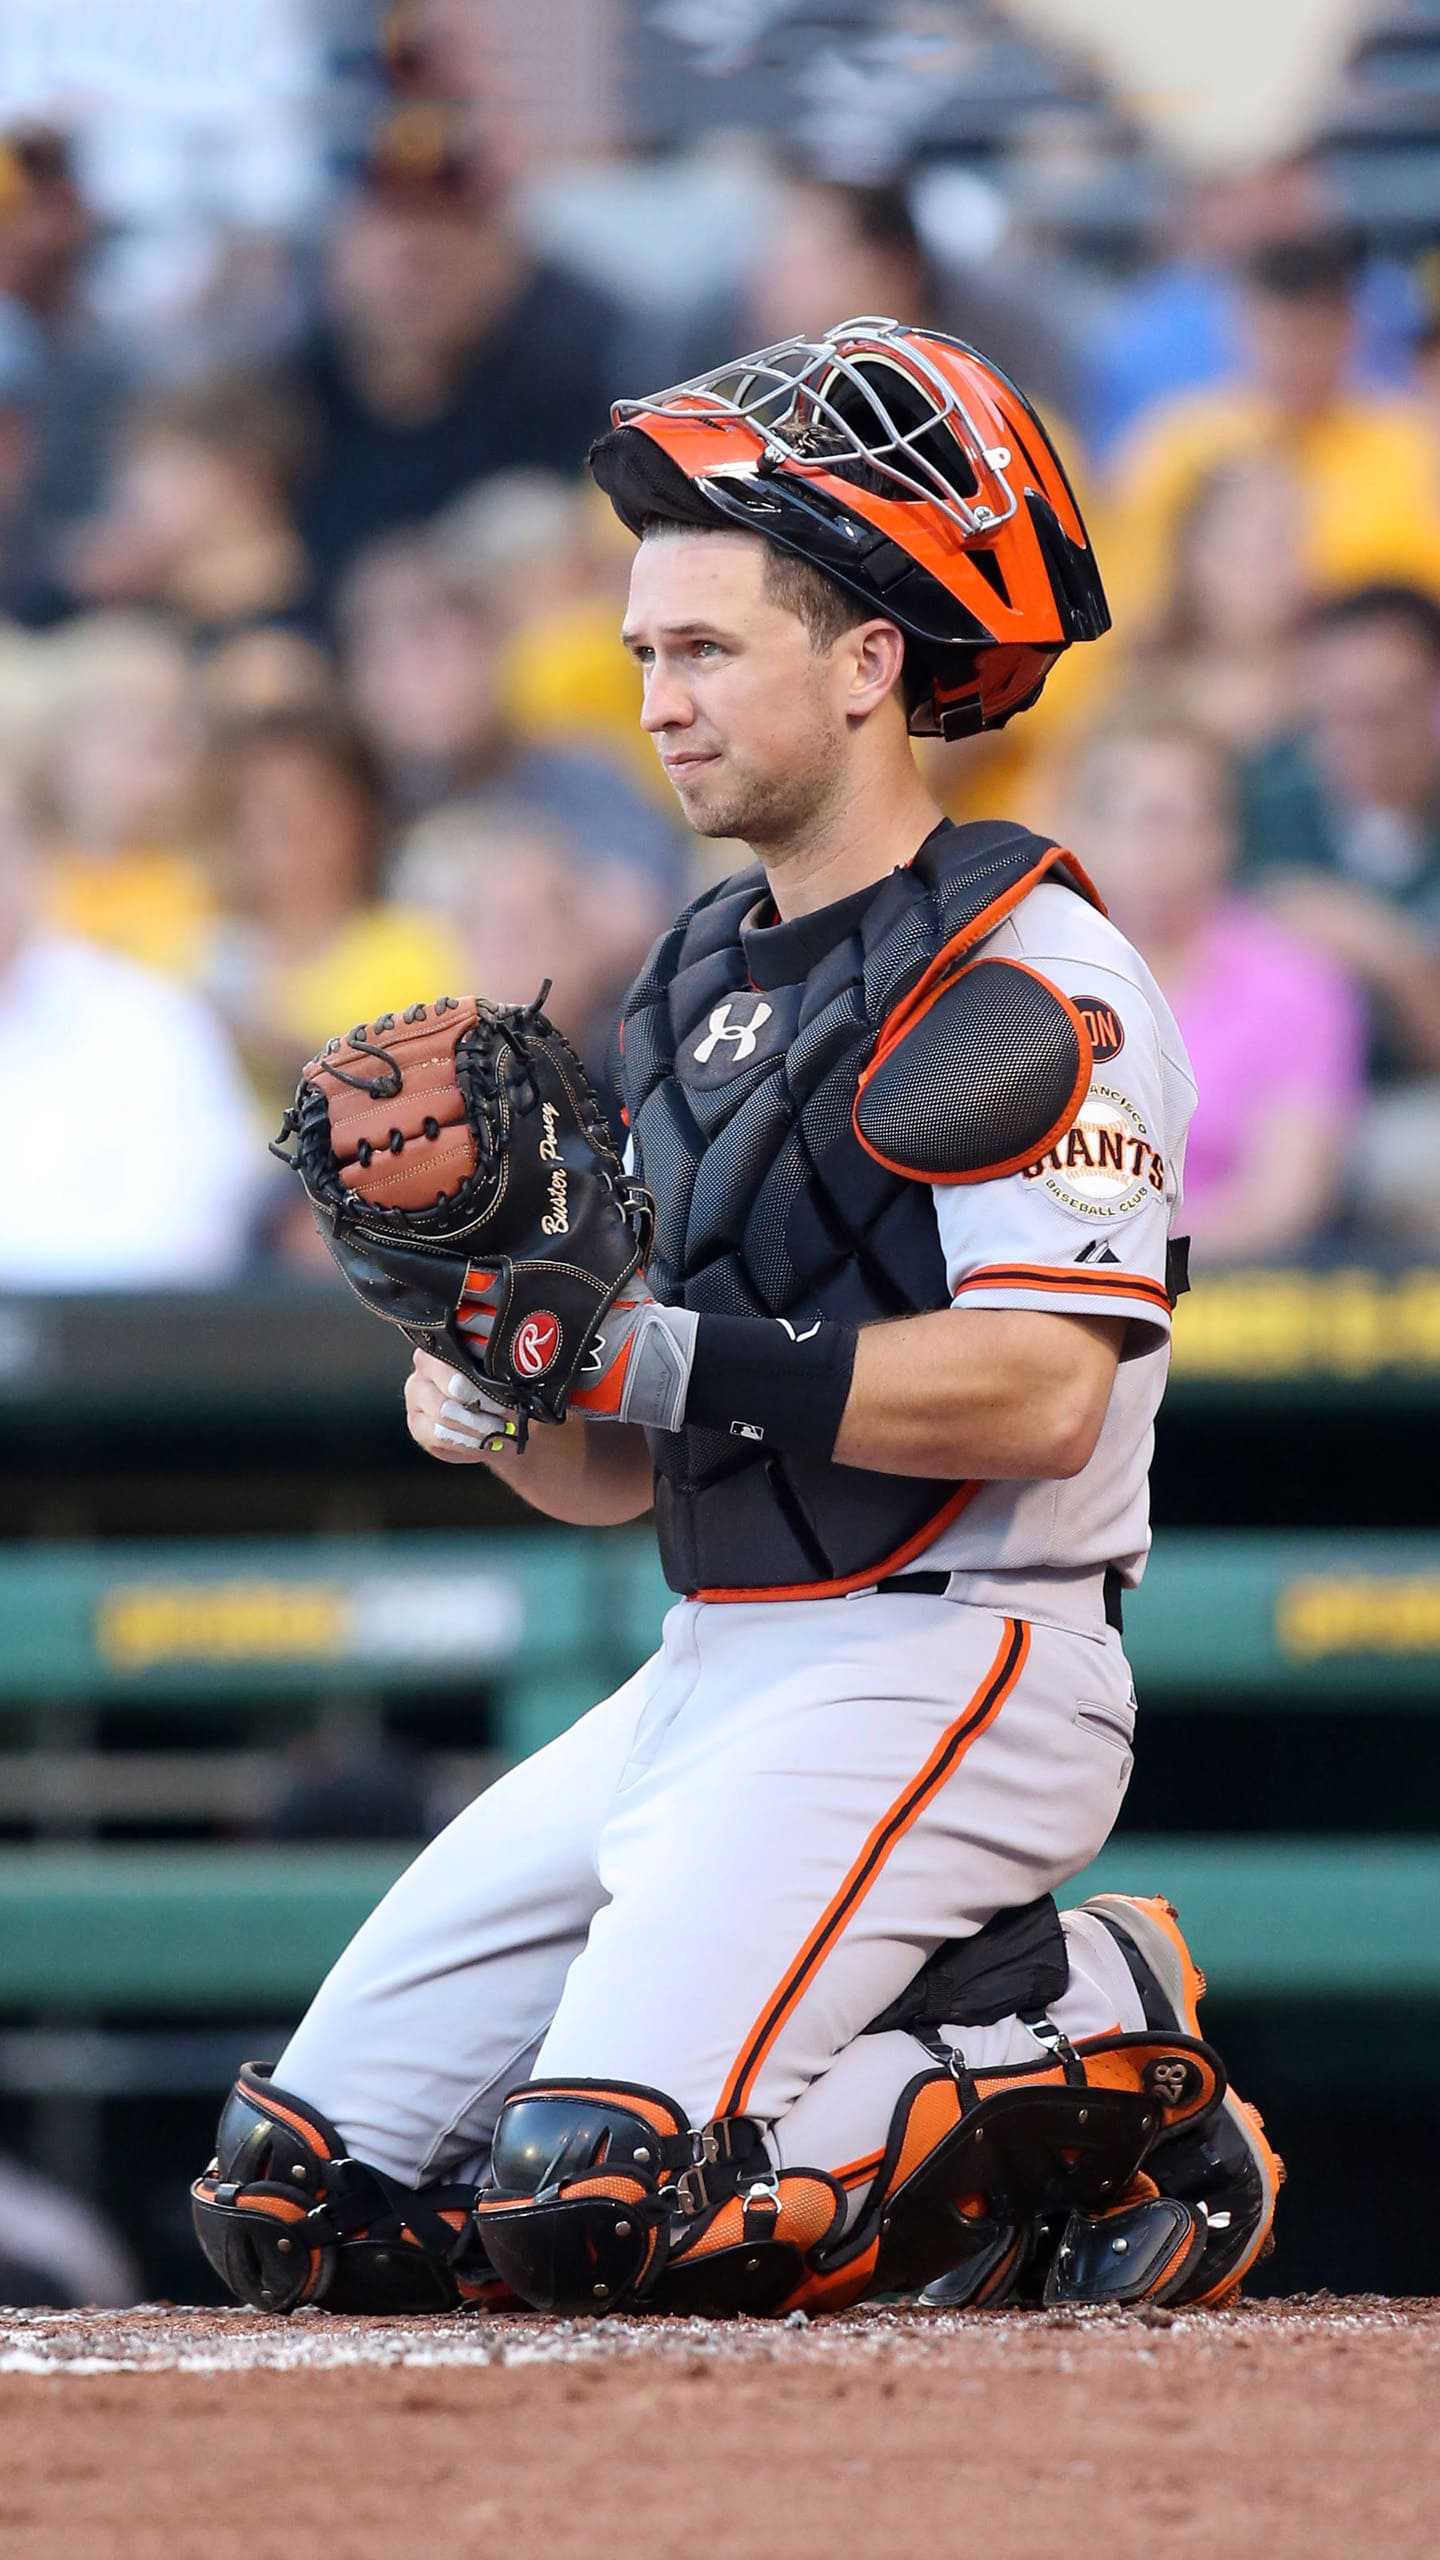 Download Buster Posey Daylight Wallpaper